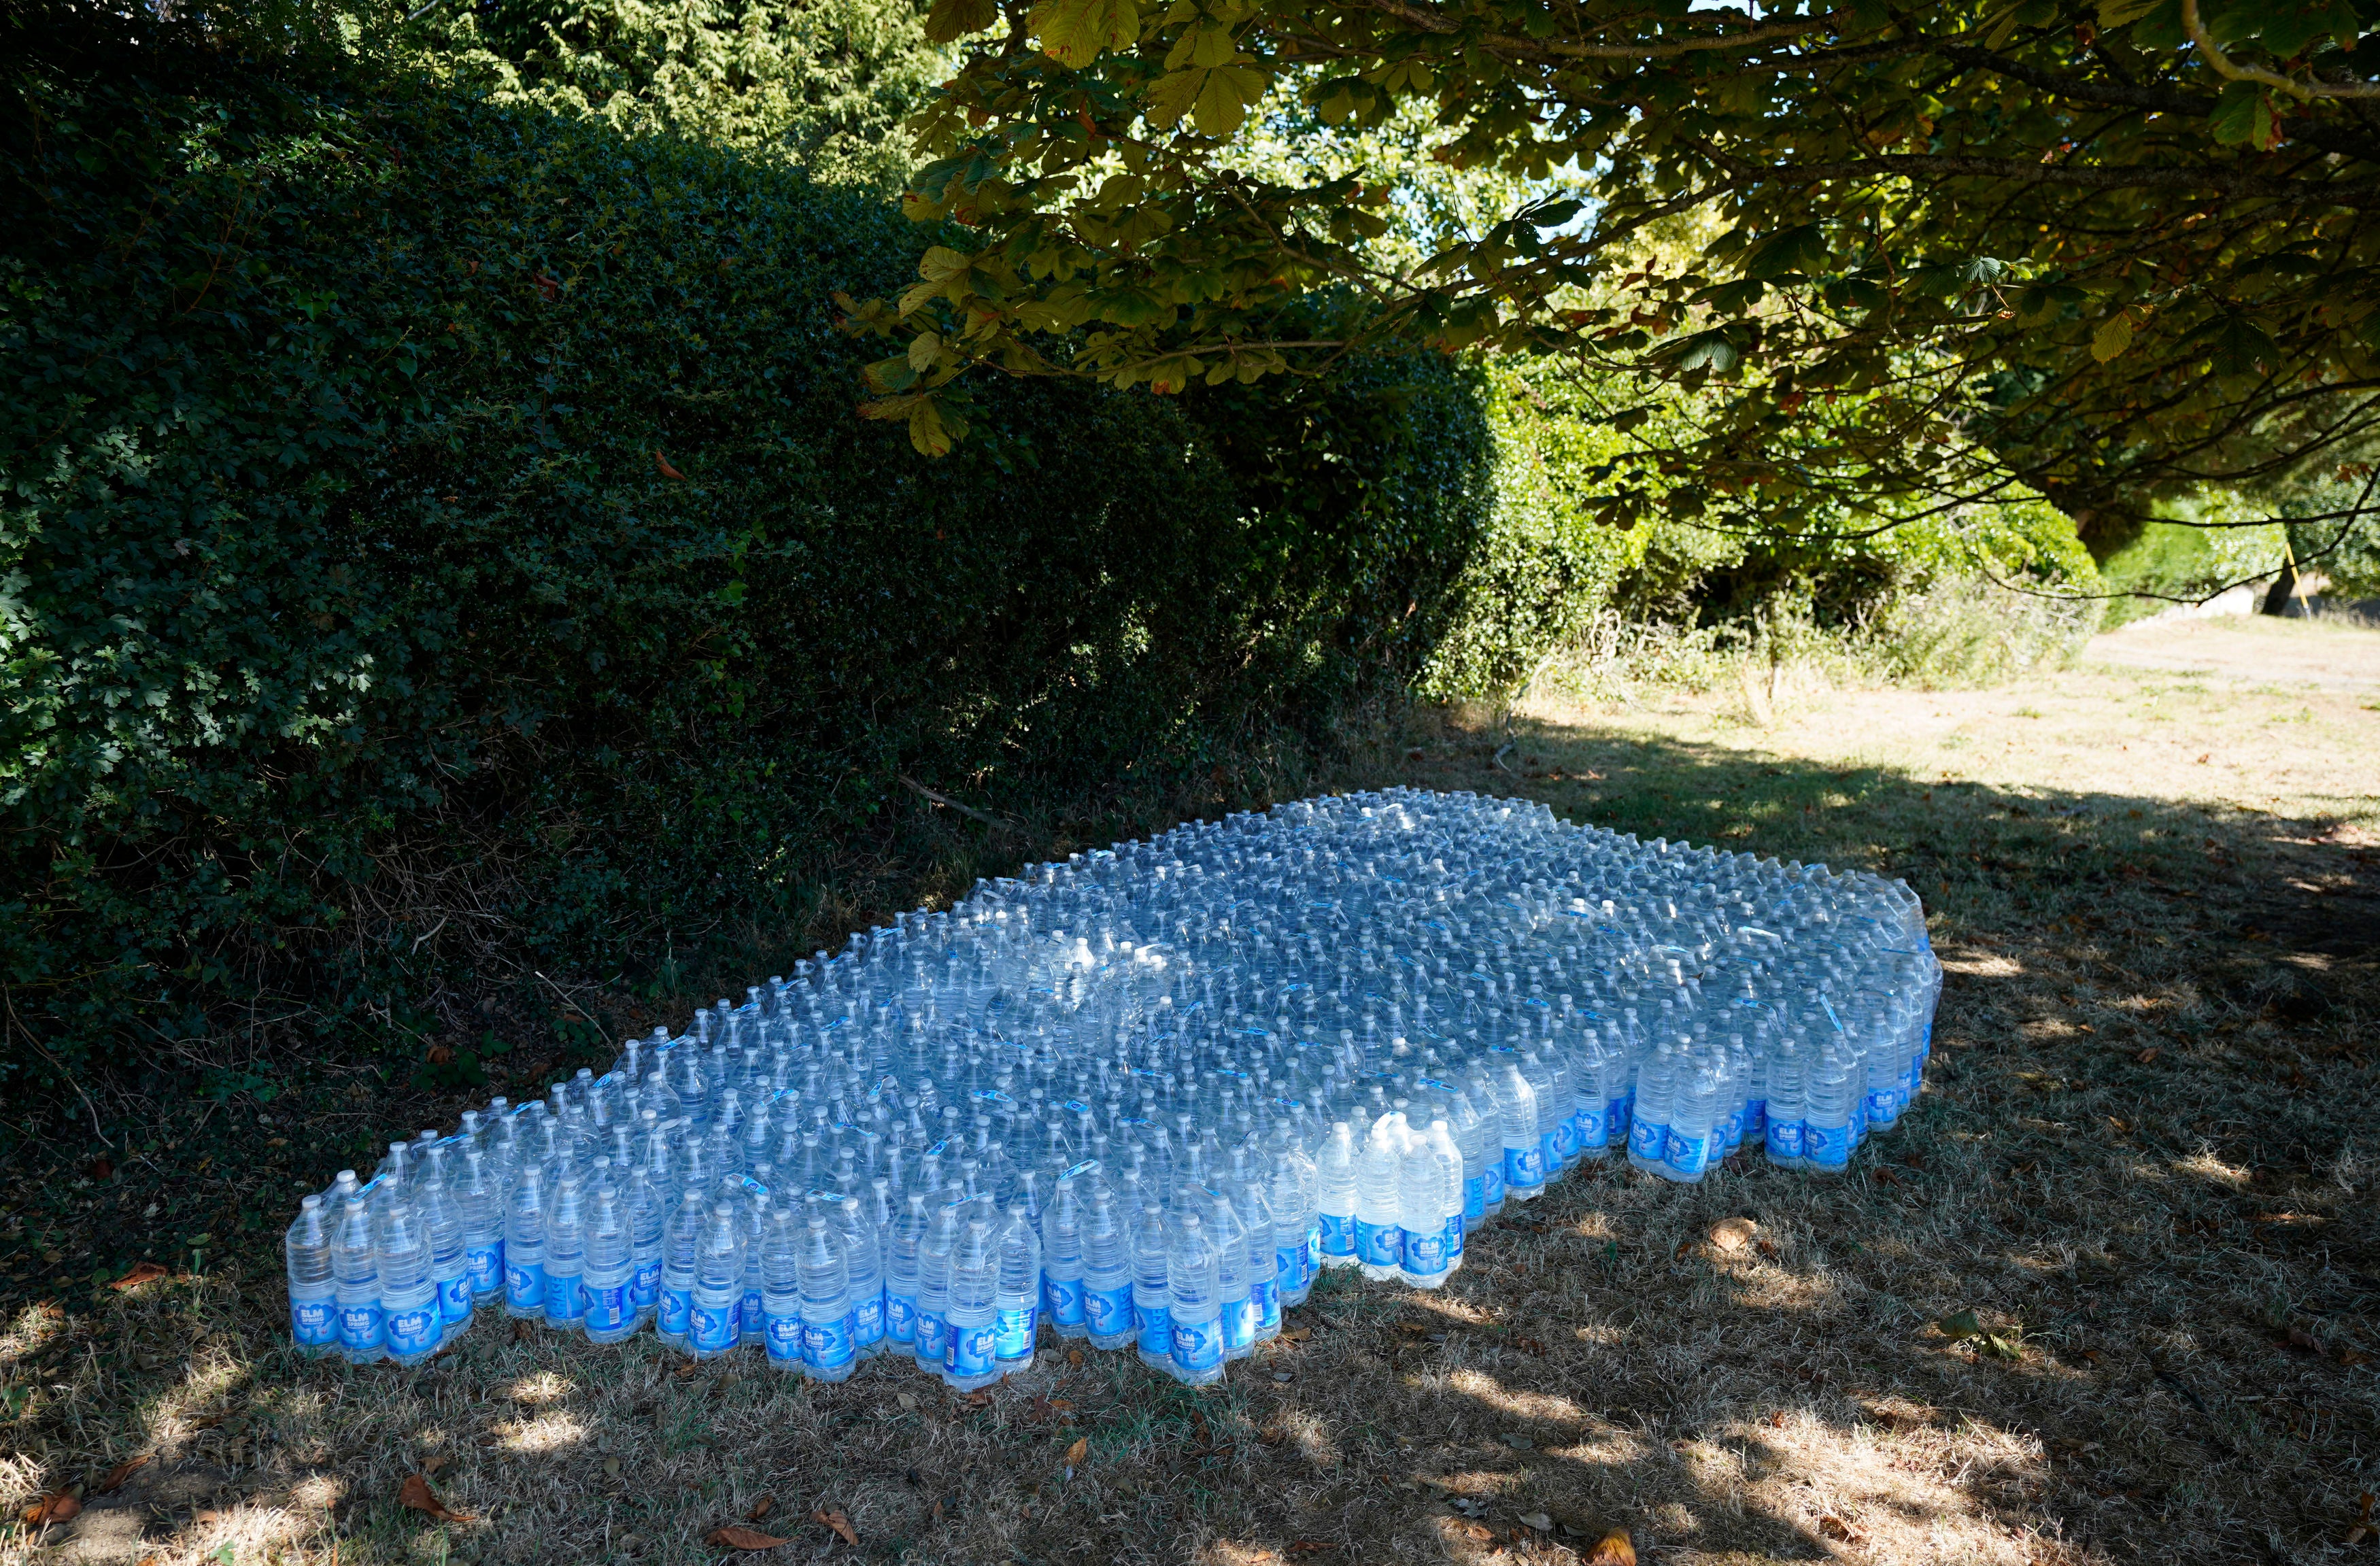 Thames Water gave out bottled water to residents in Oxfordshire this week